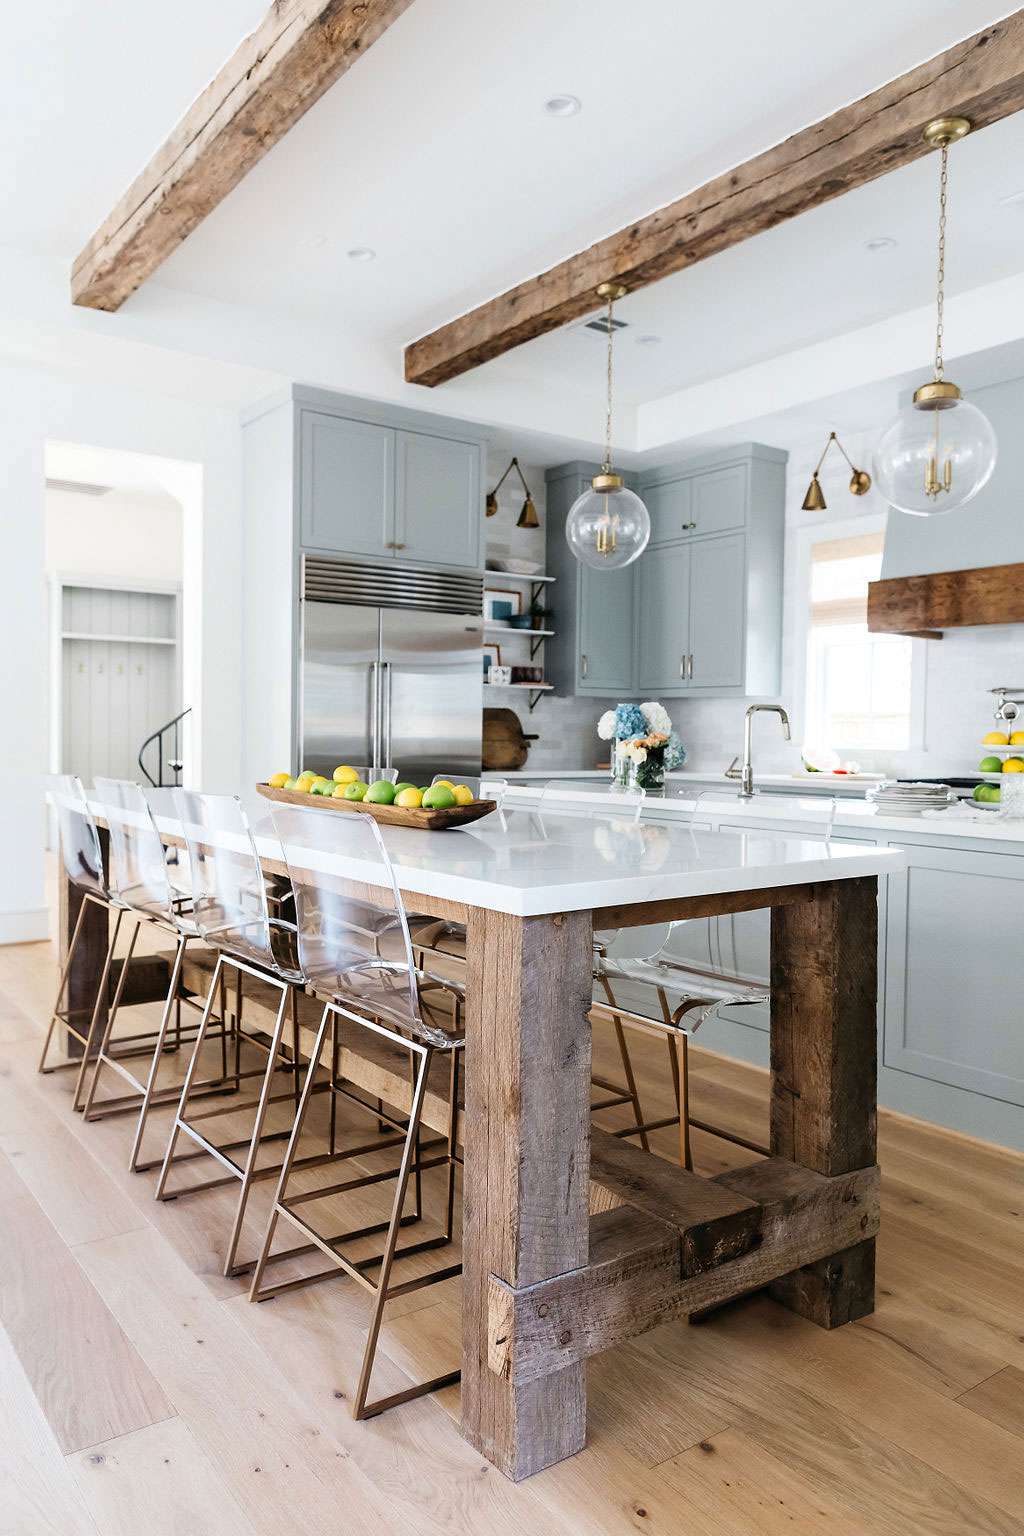 10 Designer Favorite Paint Color Ideas To Give Your Kitchen Cabinets An Instant Refresh Southern Living - What Color Should I Paint My Kitchen With Light Gray Cabinets